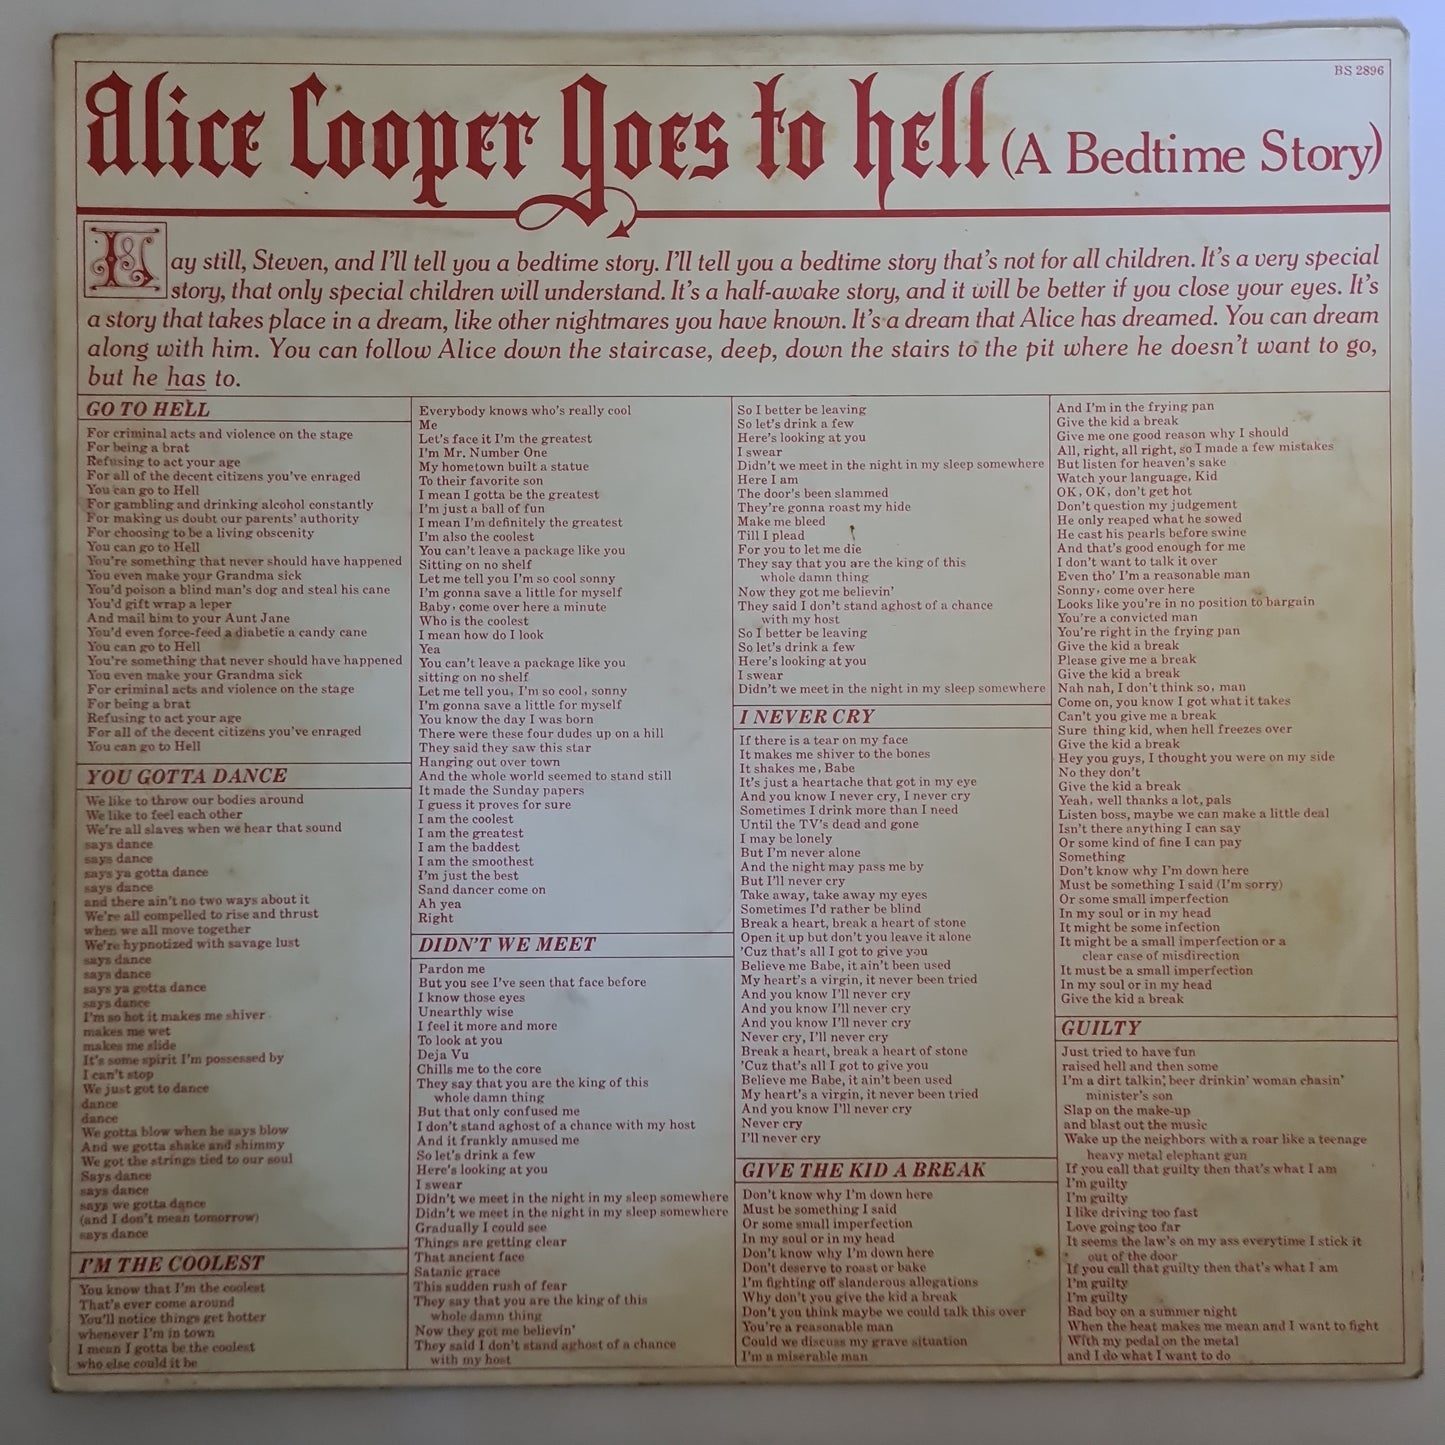 Alice Cooper – Goes To Hell - 1976 - Vinyl Record